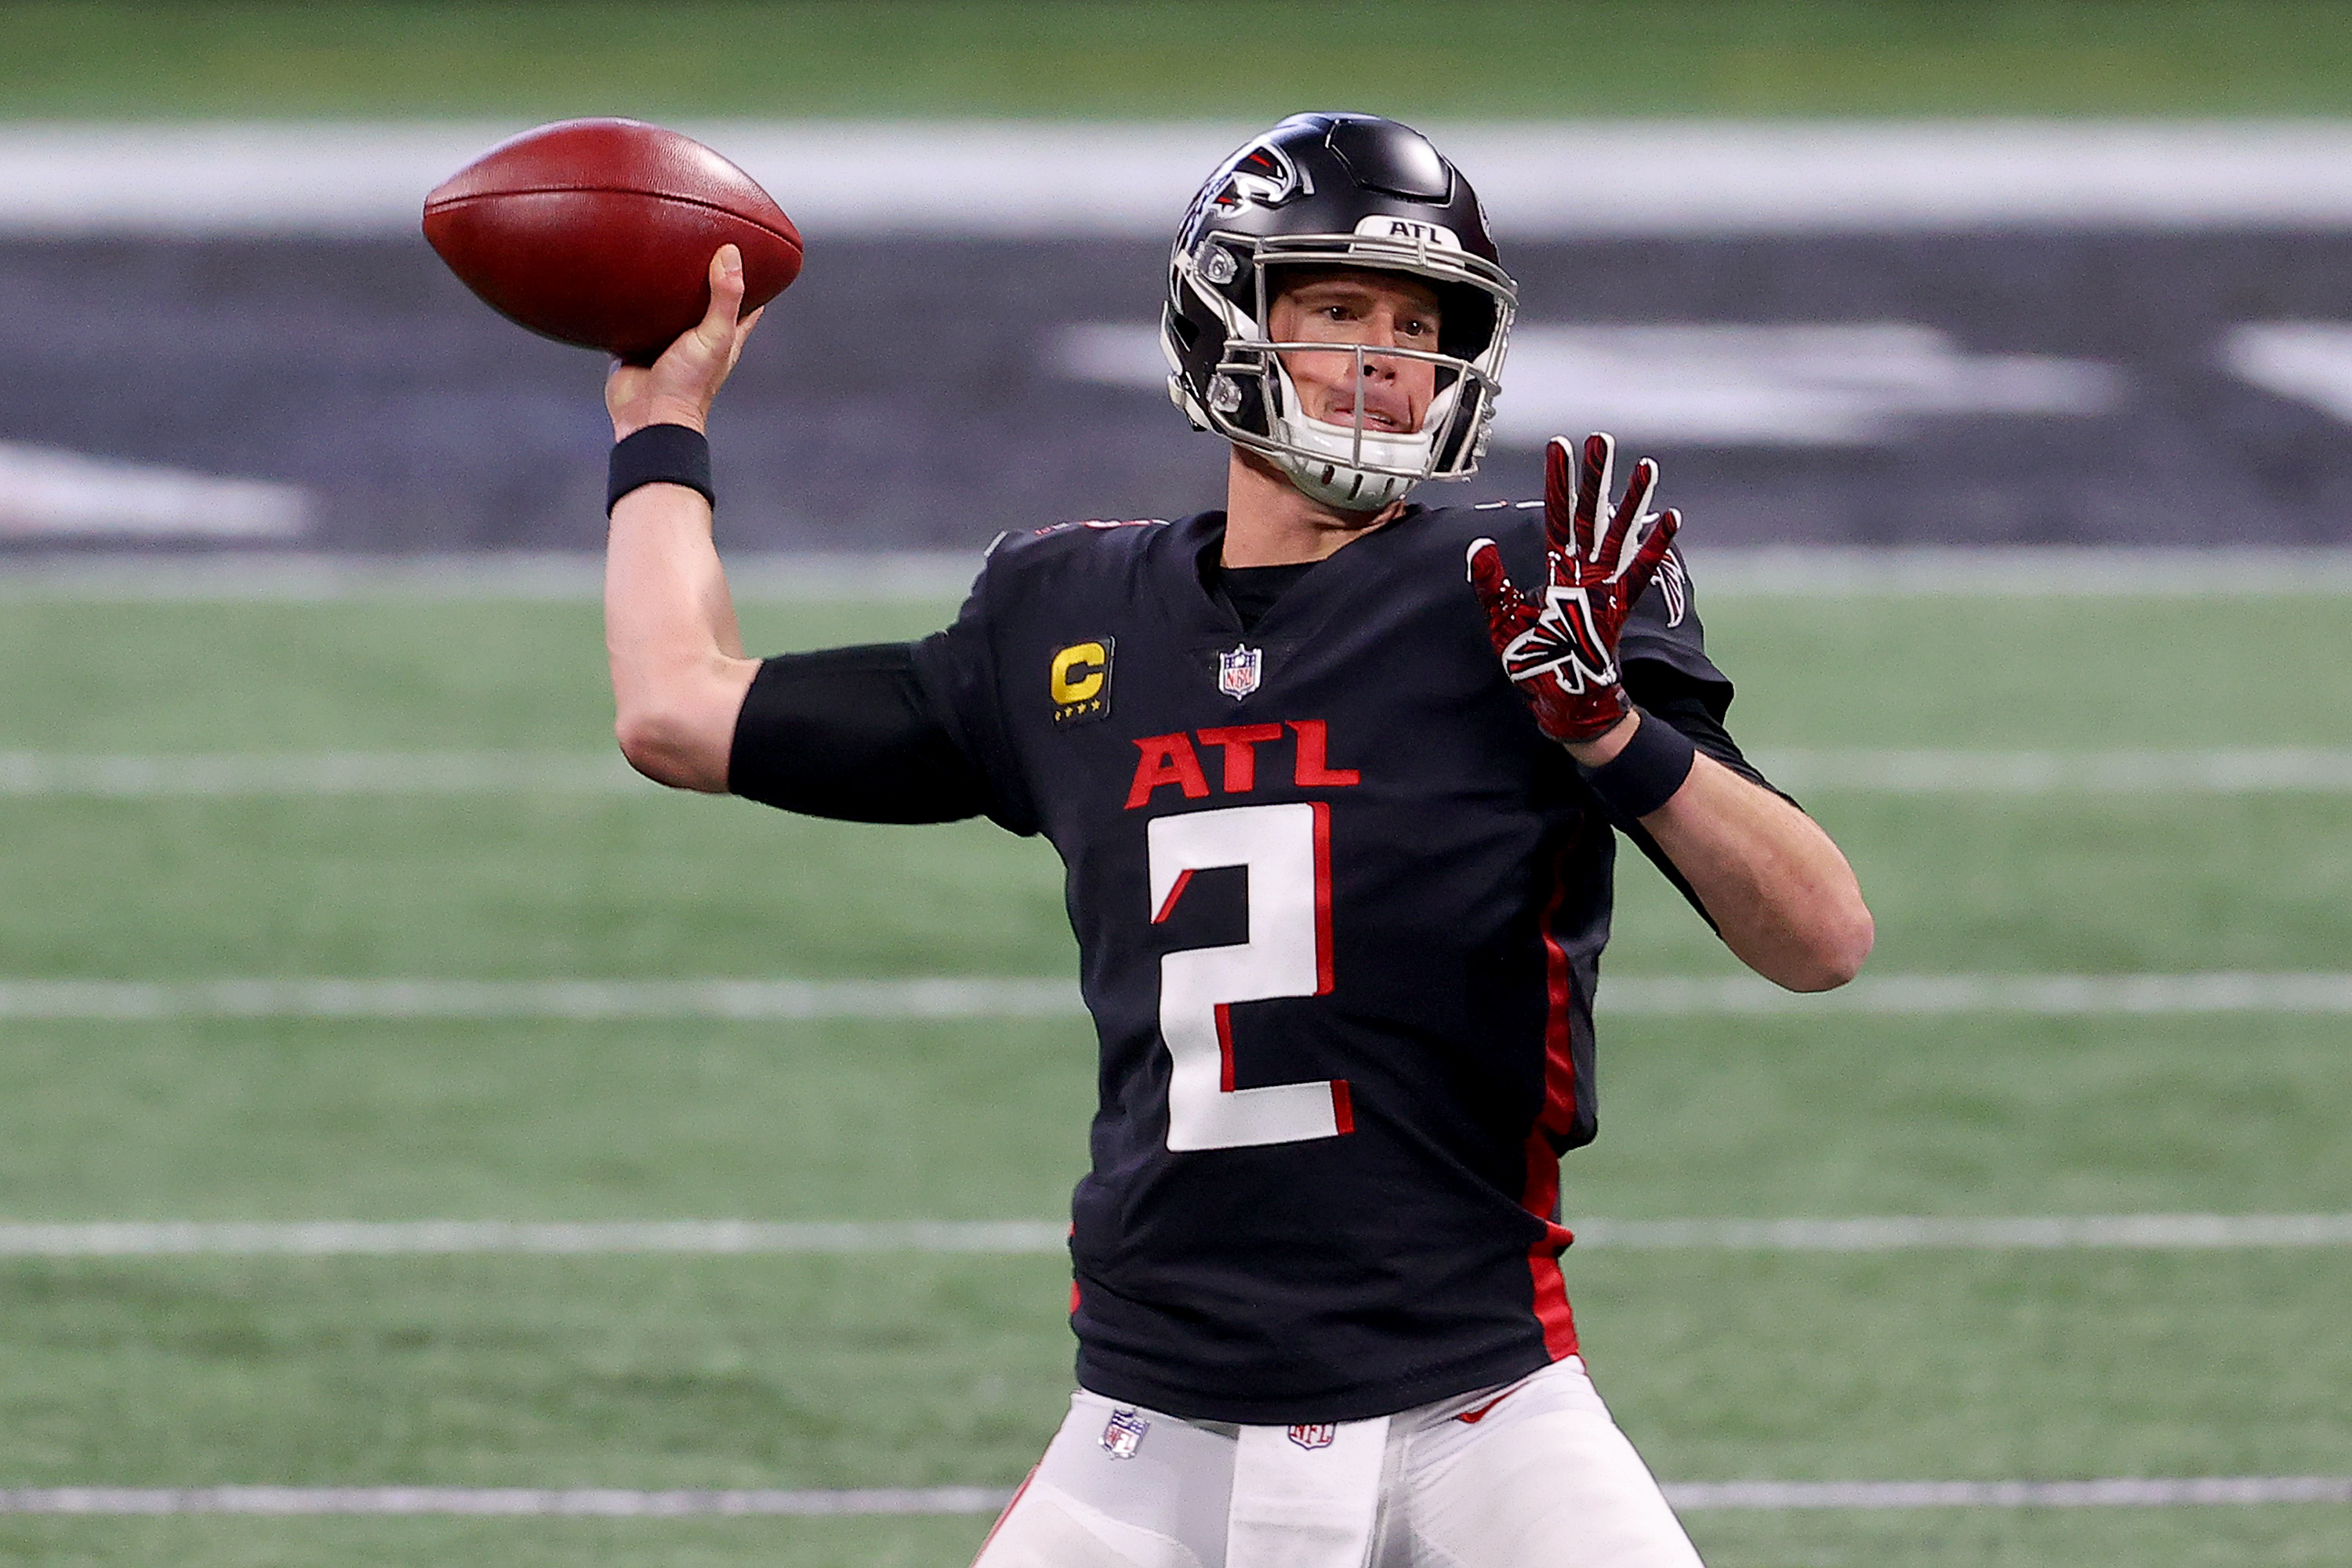 &nbsp;Matt Ryan #2 of the Atlanta Falcons throws a pass against the Tampa Bay Buccaneers during the first quarter in the game at Mercedes-Benz Stadium on December 20, 2020 in Atlanta, Georgia.